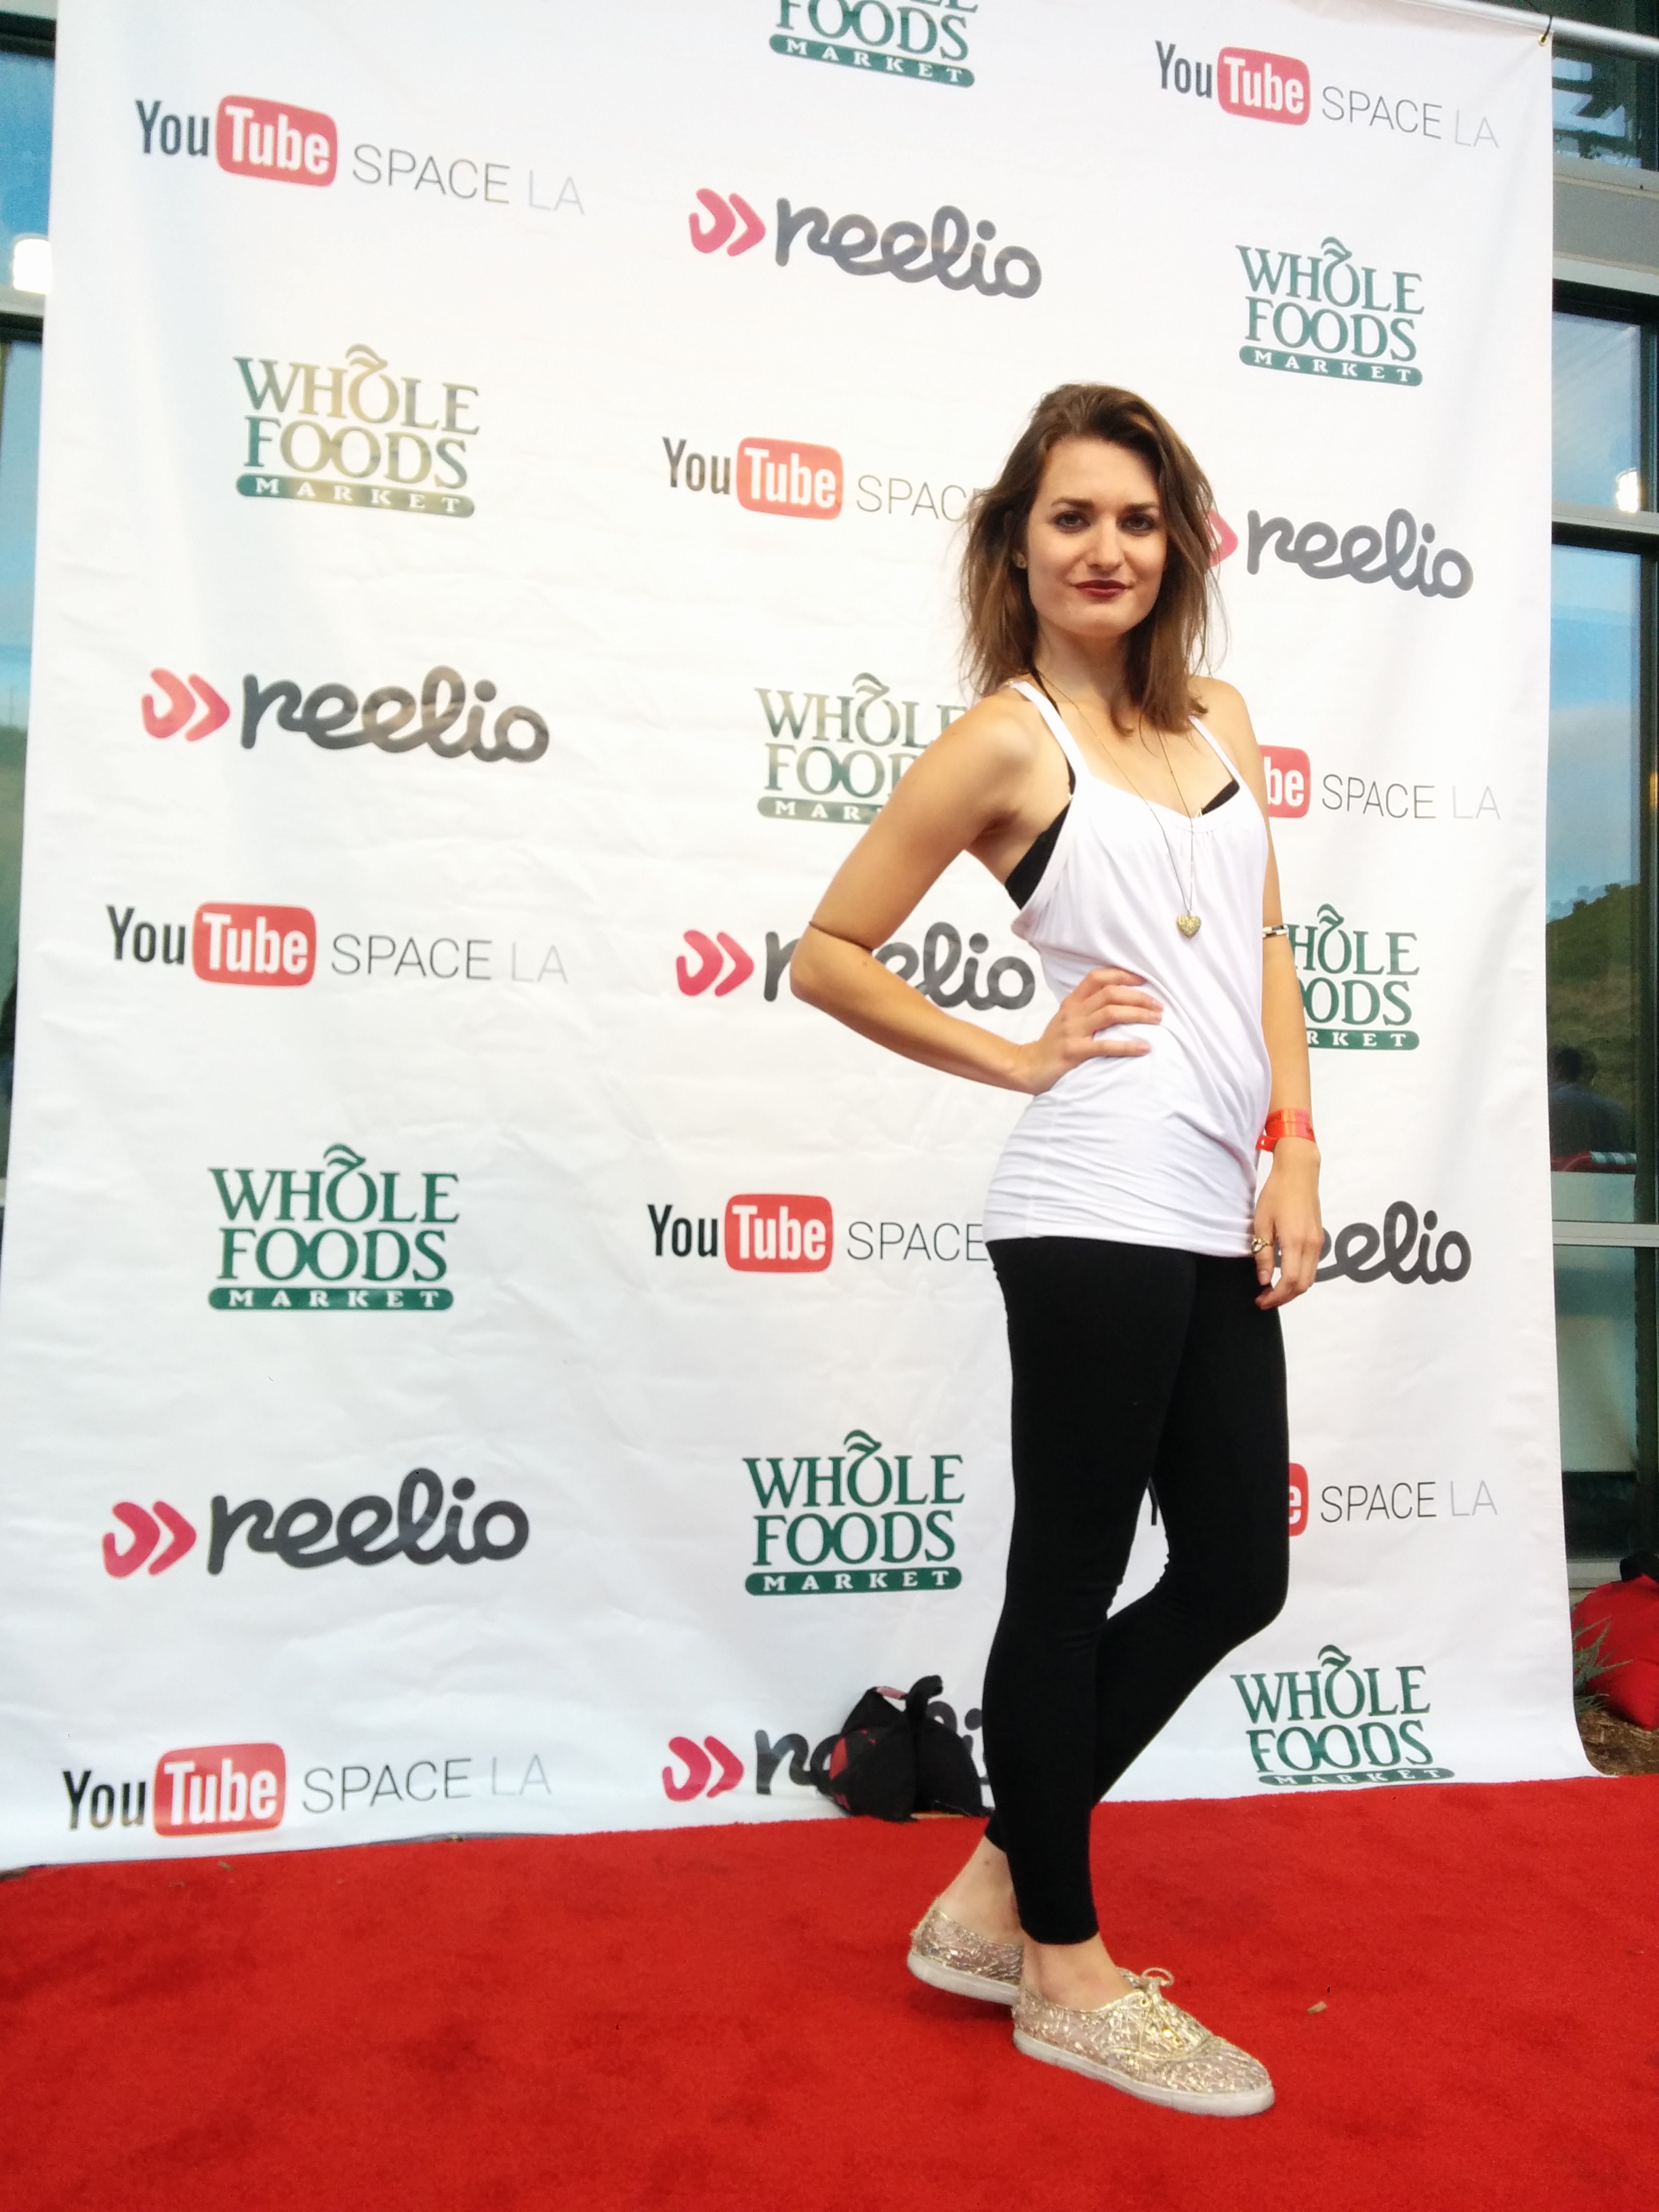 Red Carpet event at YouTube Spaces in Los Angeles